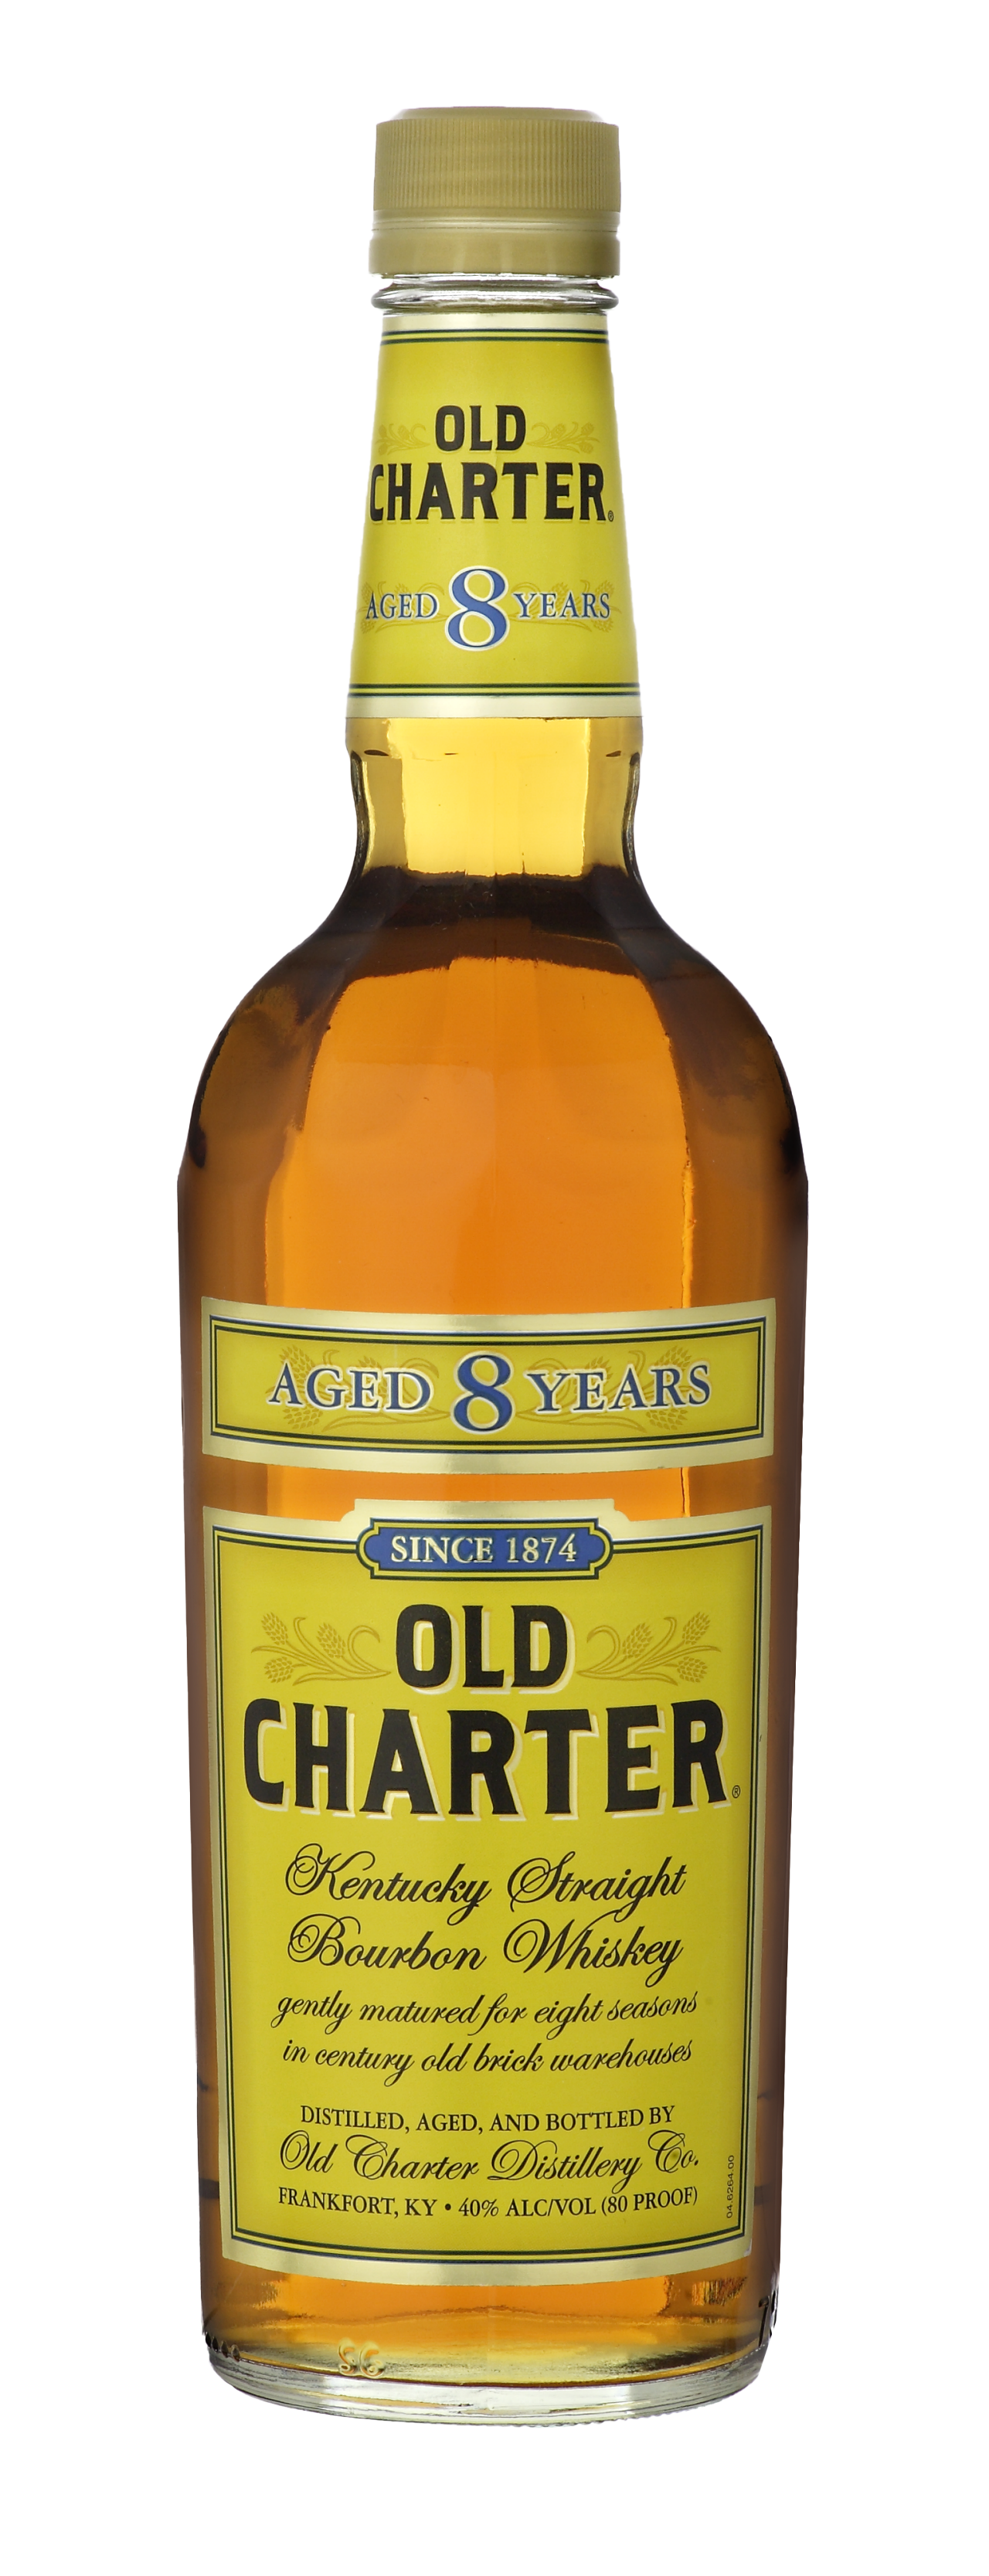 Old Charter 8 Years Bottle